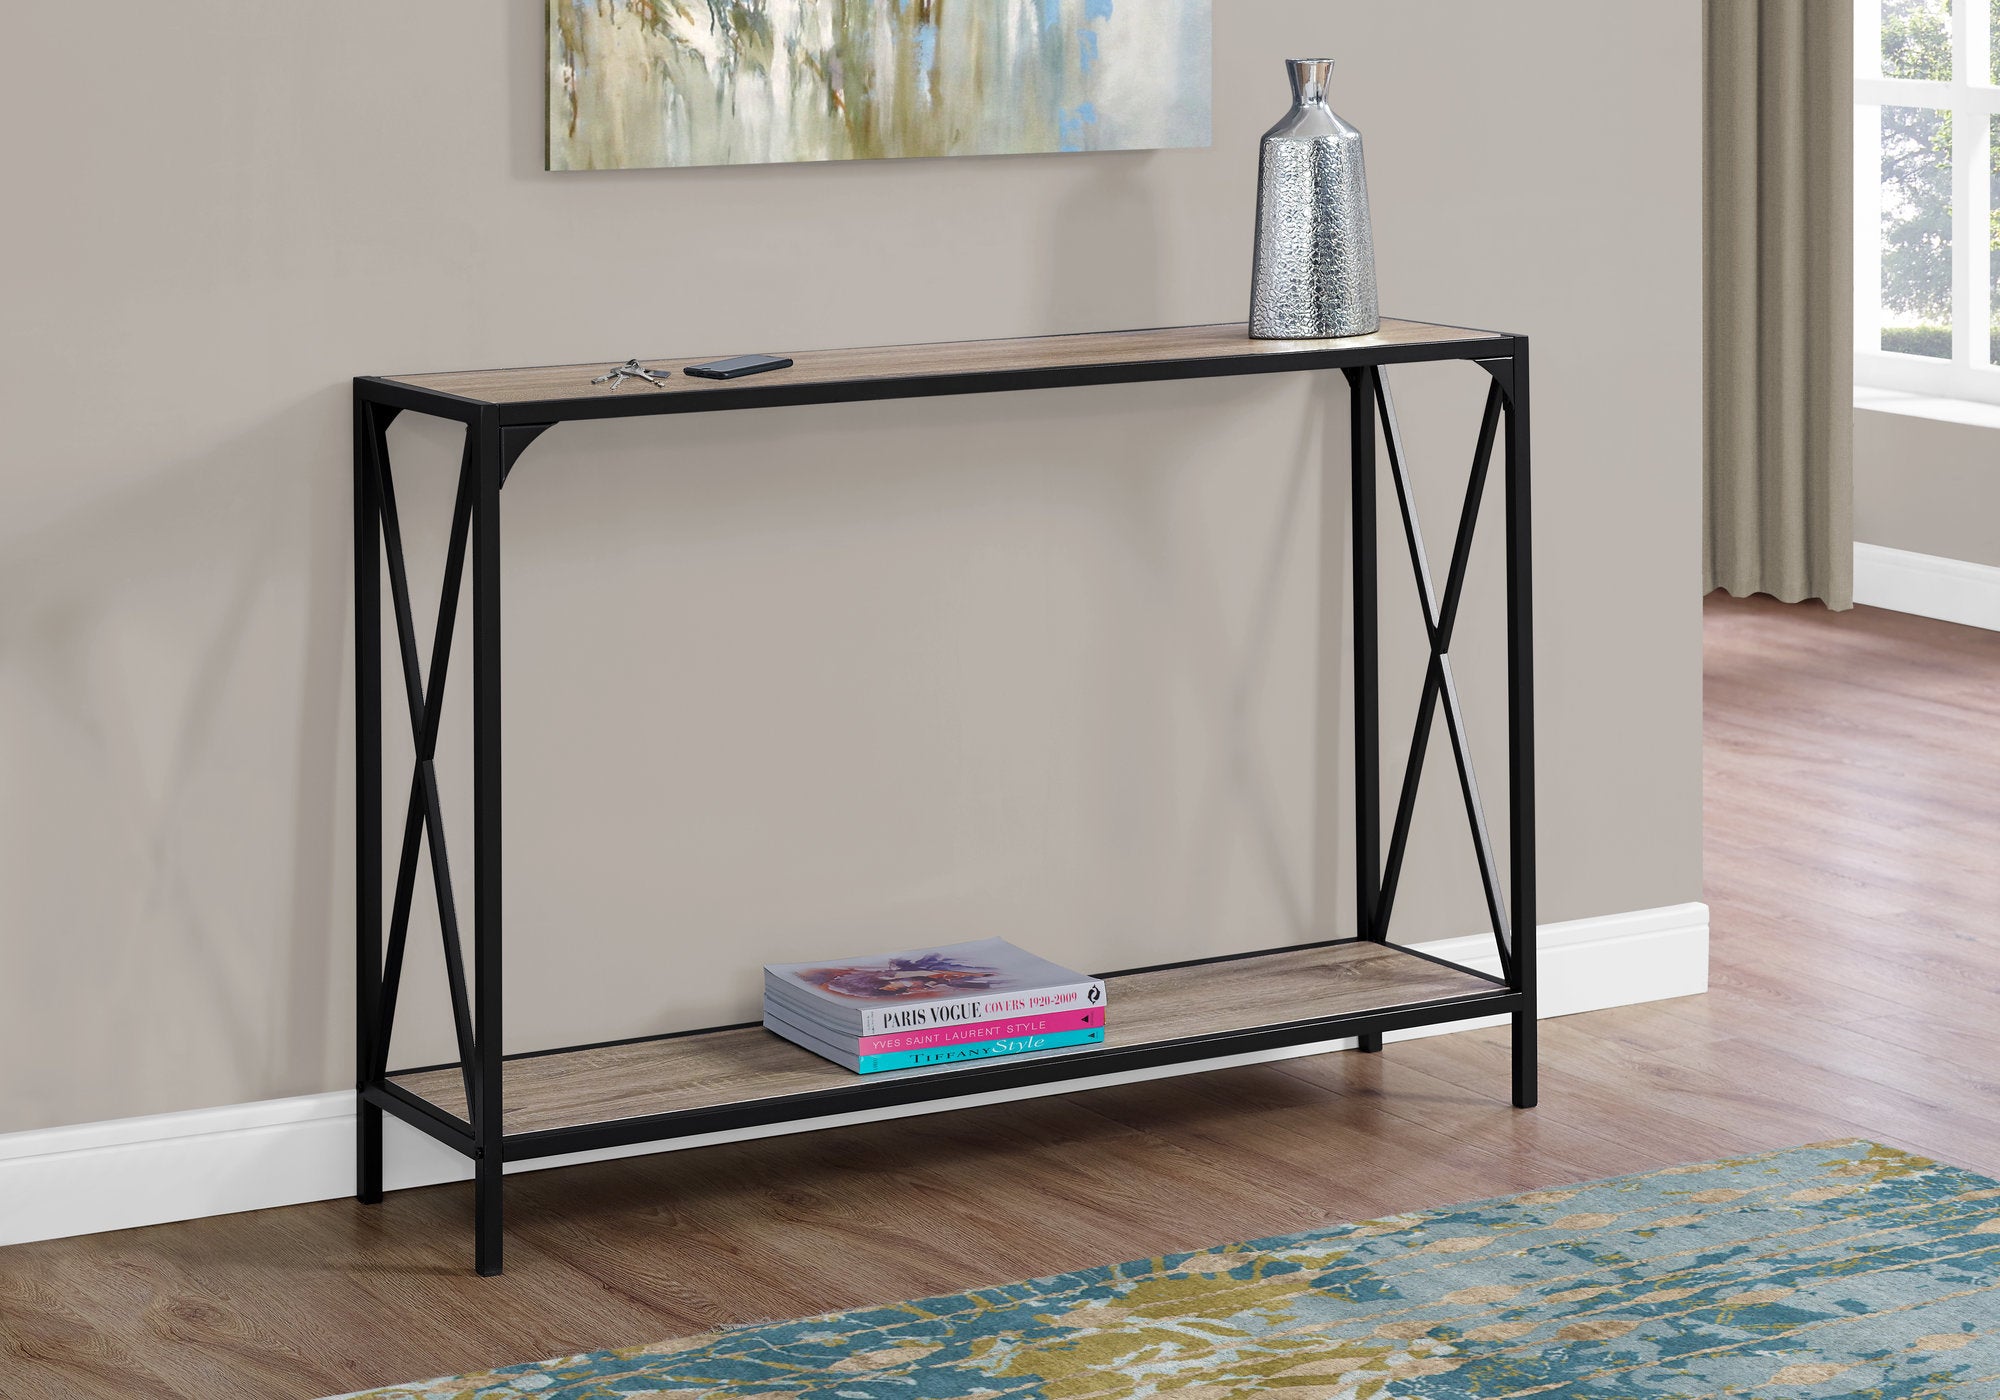 MN-132125    Accent Table, Console, Entryway, Narrow, Sofa, Living Room, Bedroom, Metal Frame, Laminate, Dark Taupe, Black, Contemporary, Modern